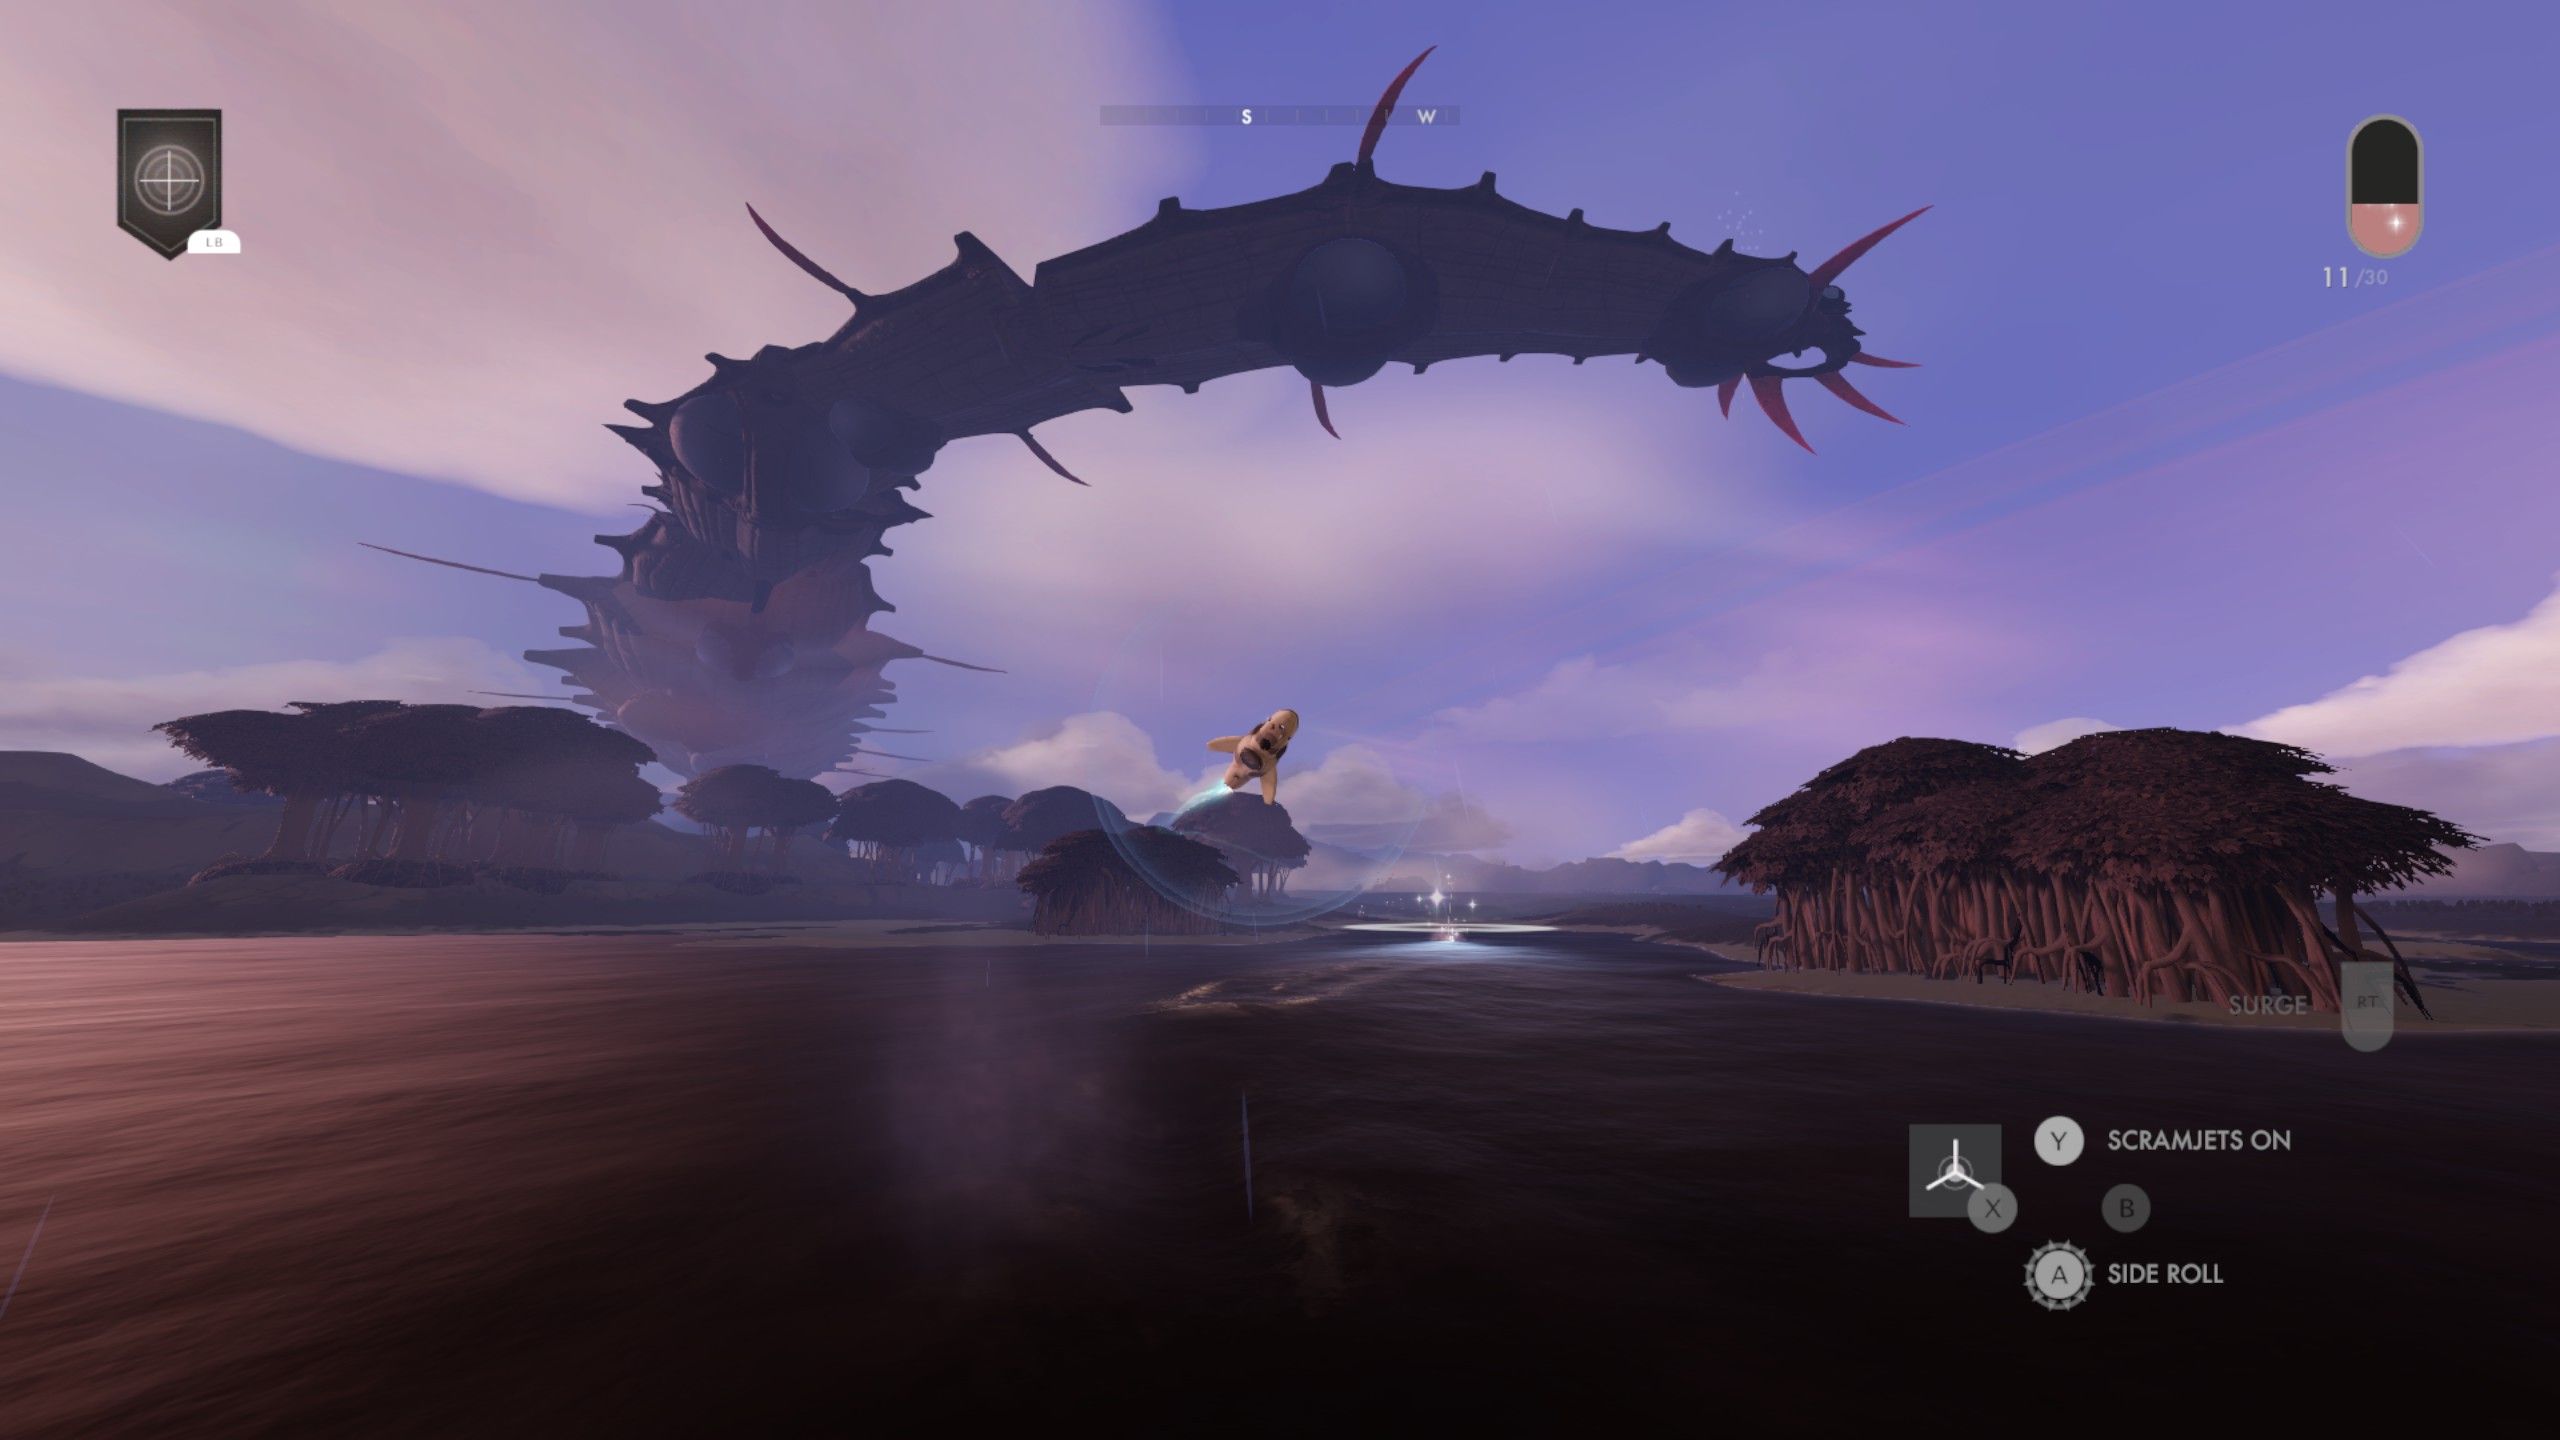 The ship in Jett Given Time skimming along the top of some water, while a huge segmented insect-like creature flies overhead